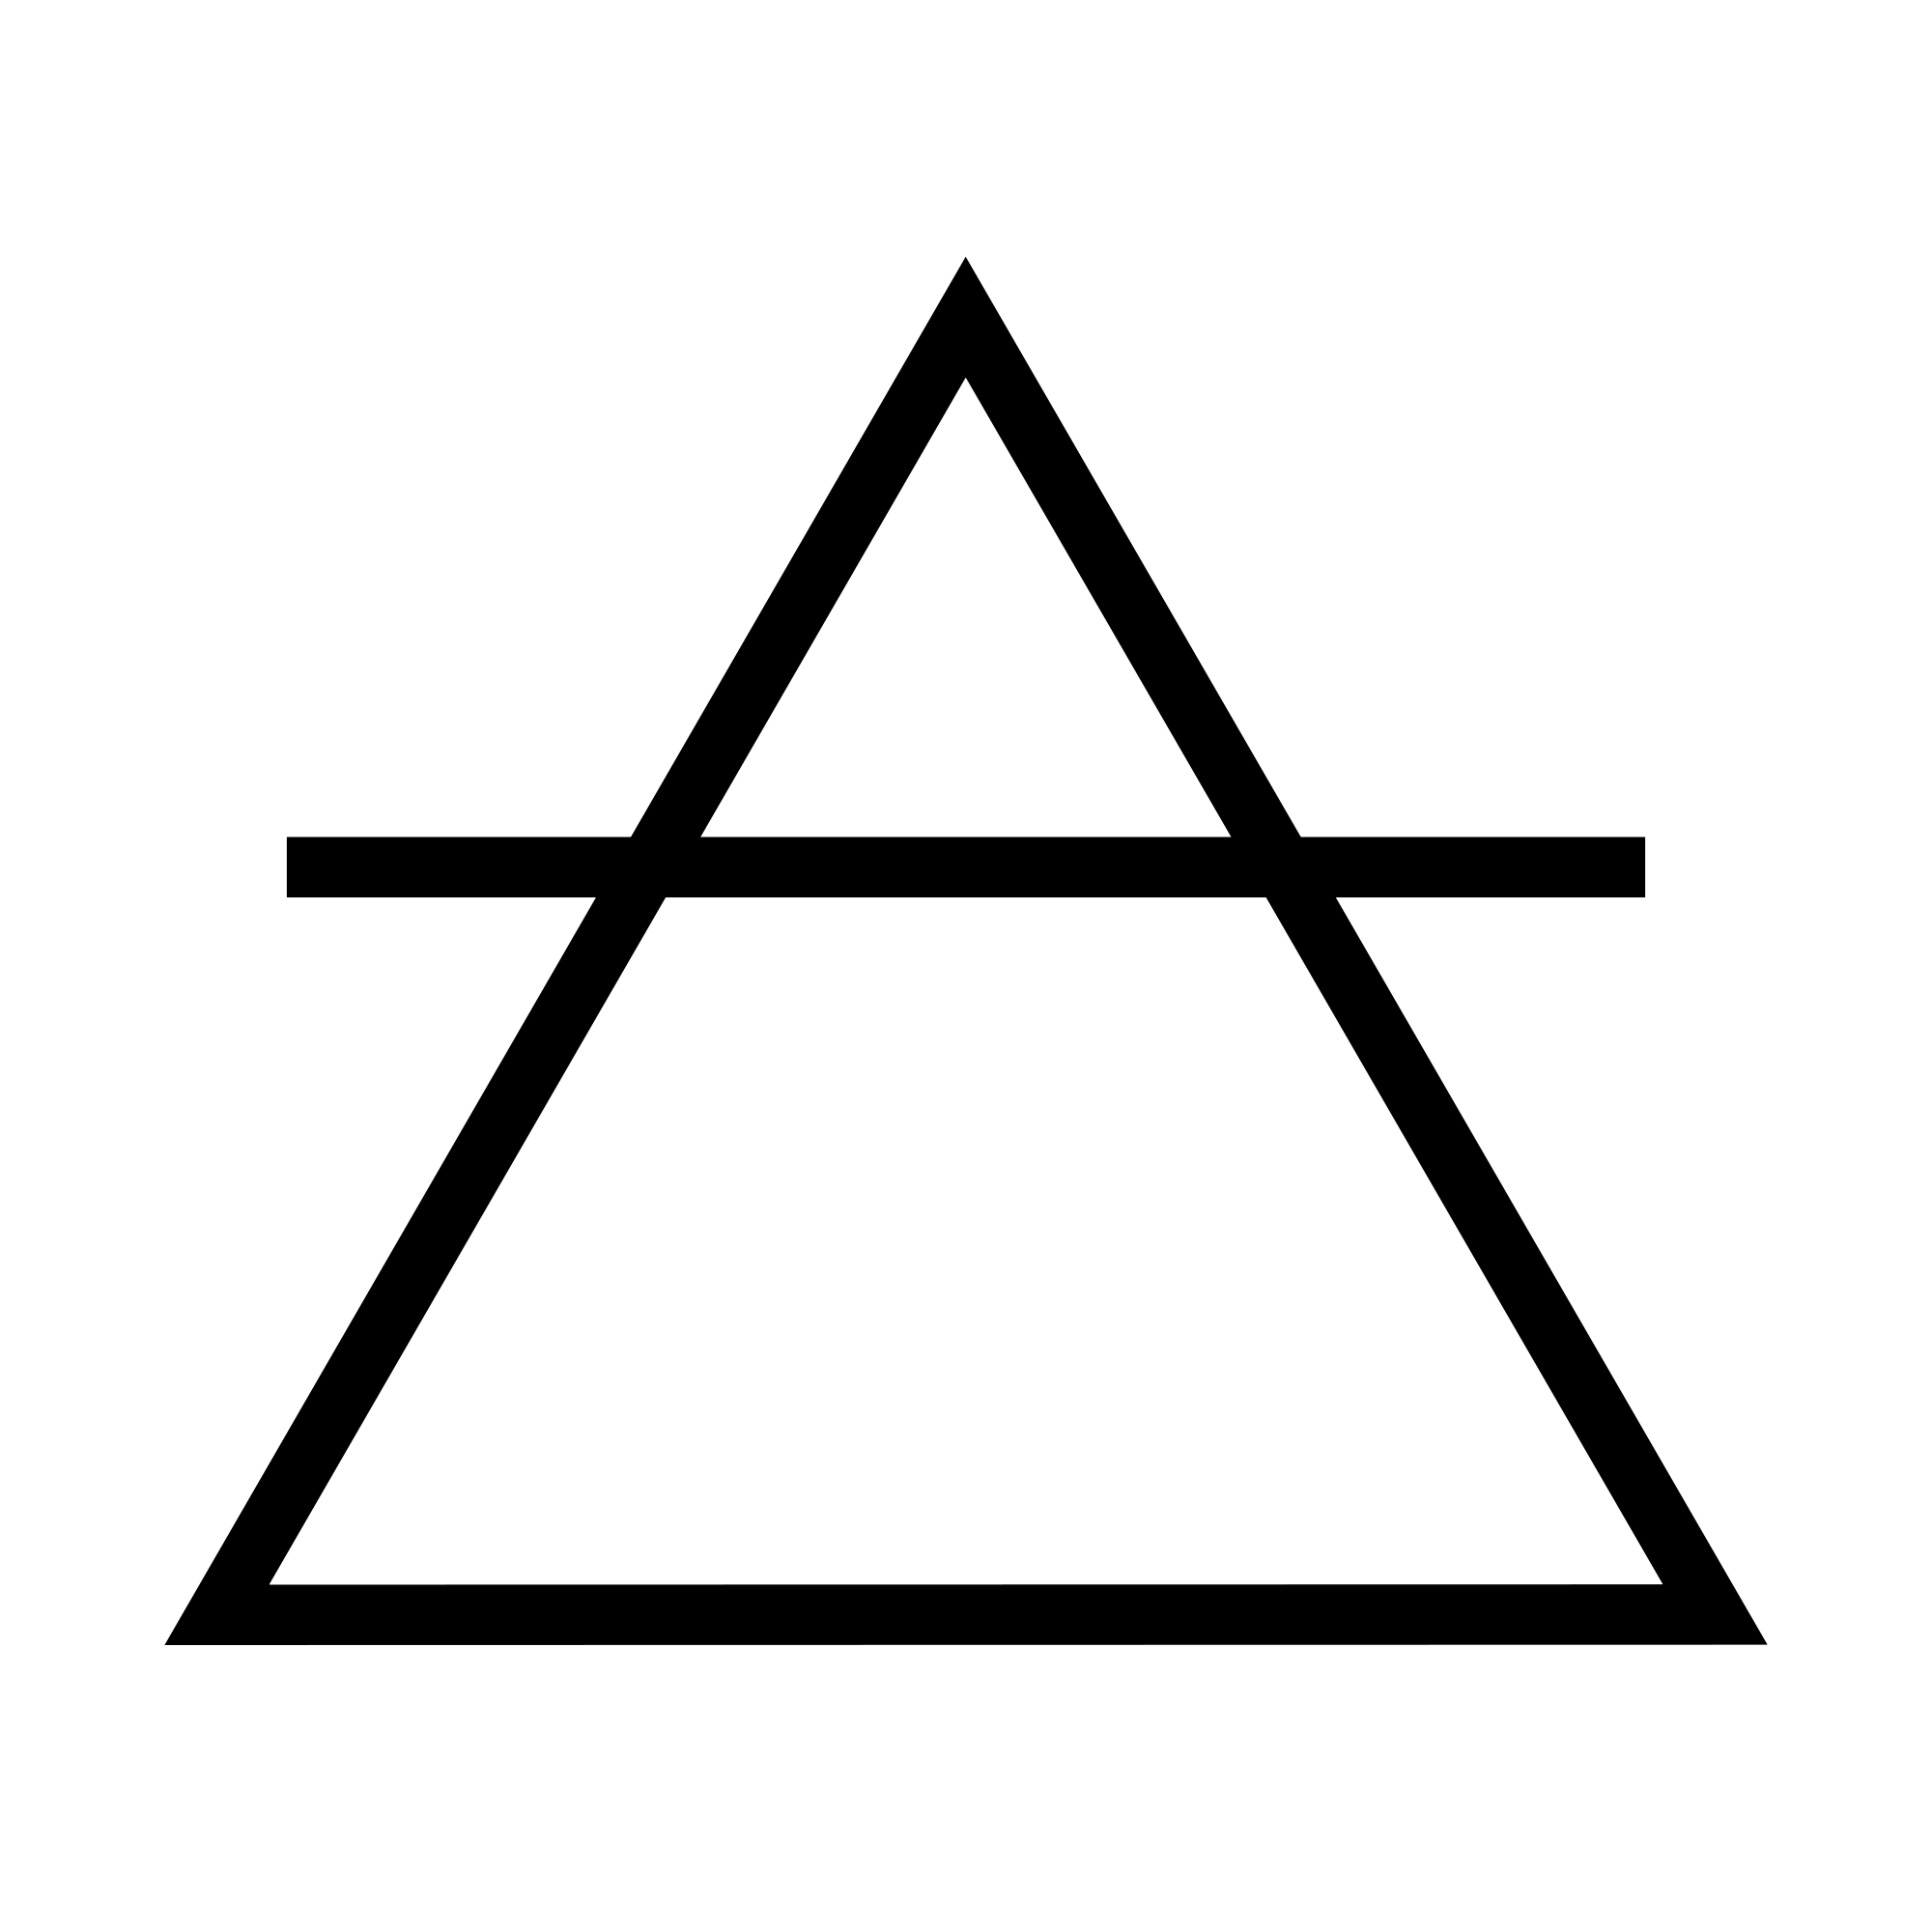 Empty Triangle Logo - What does a triangle tattoo mean?